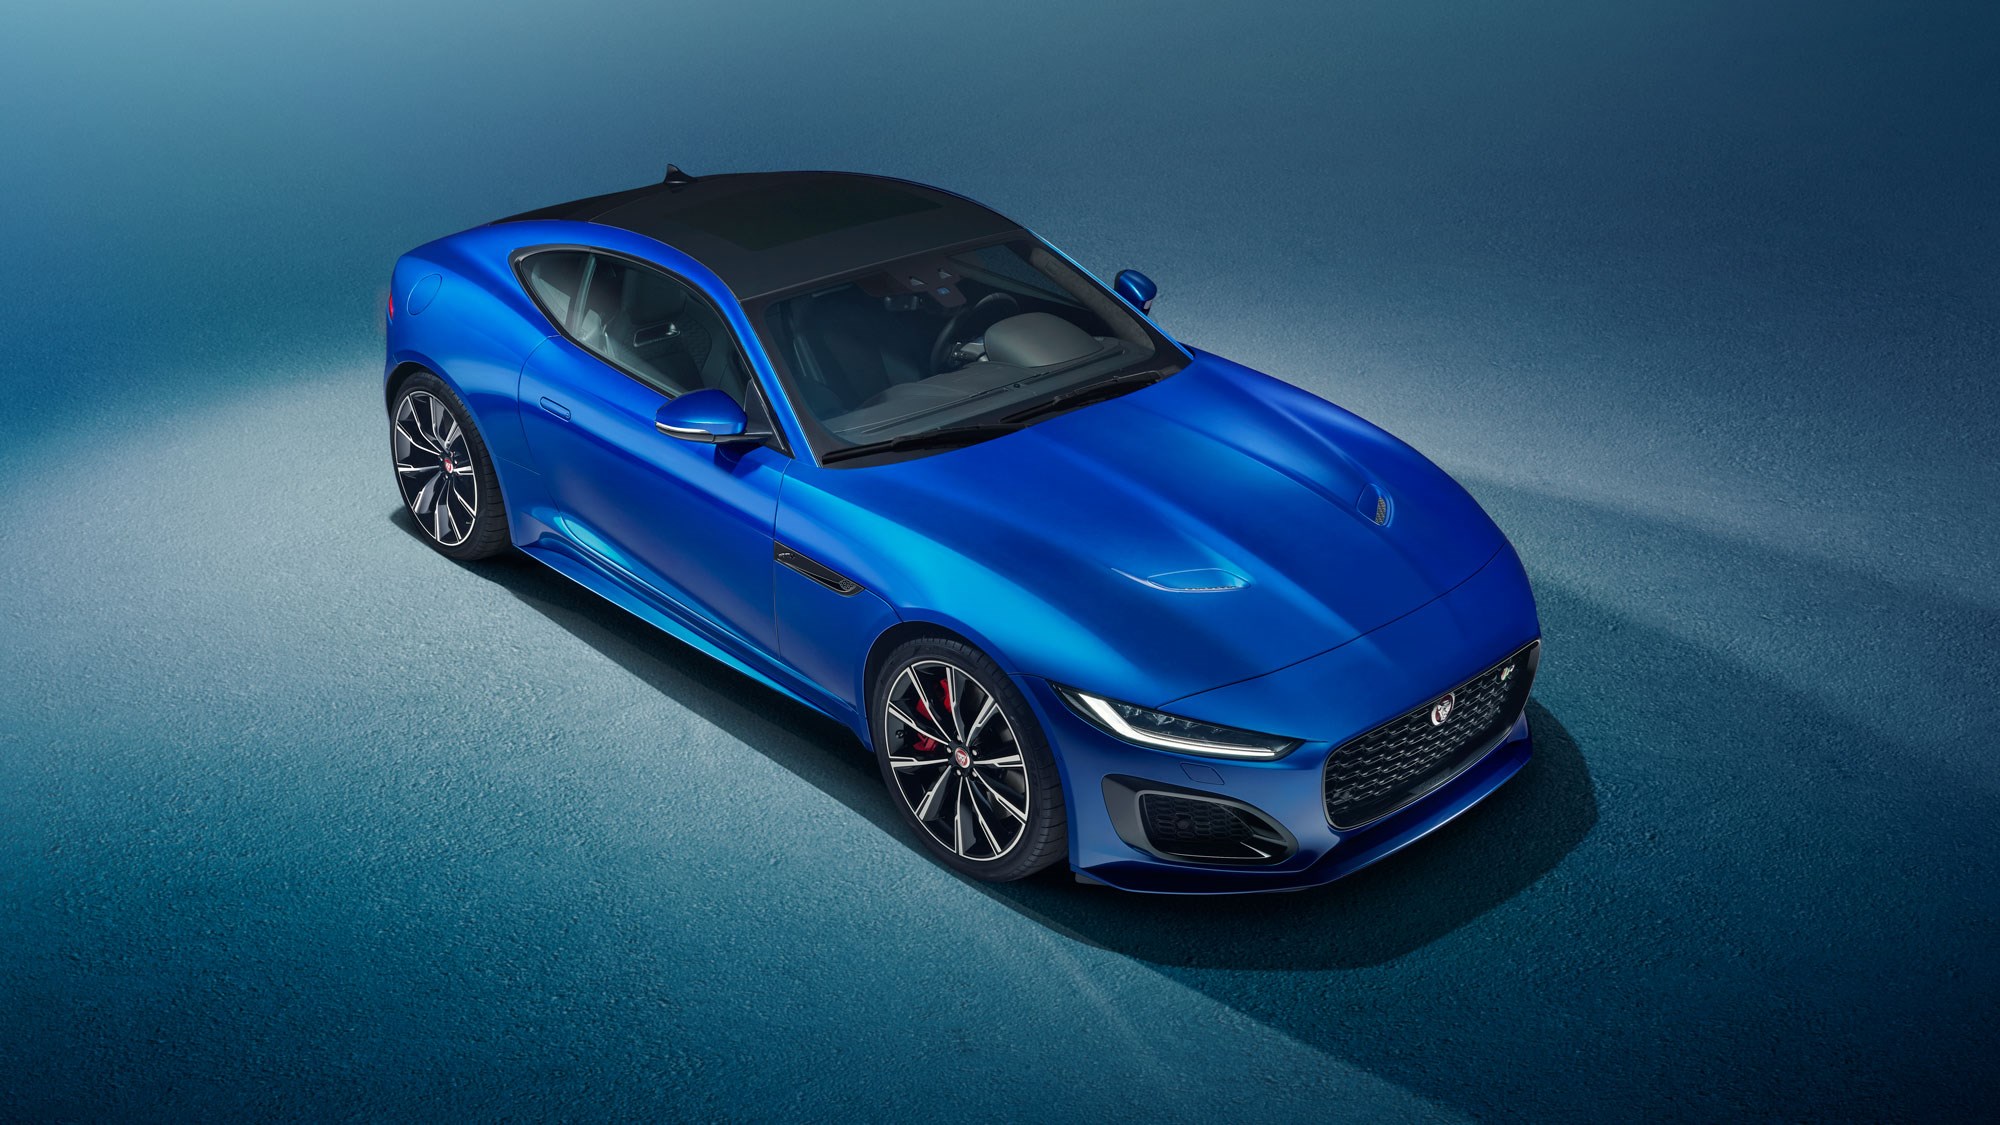 Jaguar F-Type 75 Special Edition Debuts As Sports Car's Swan Song